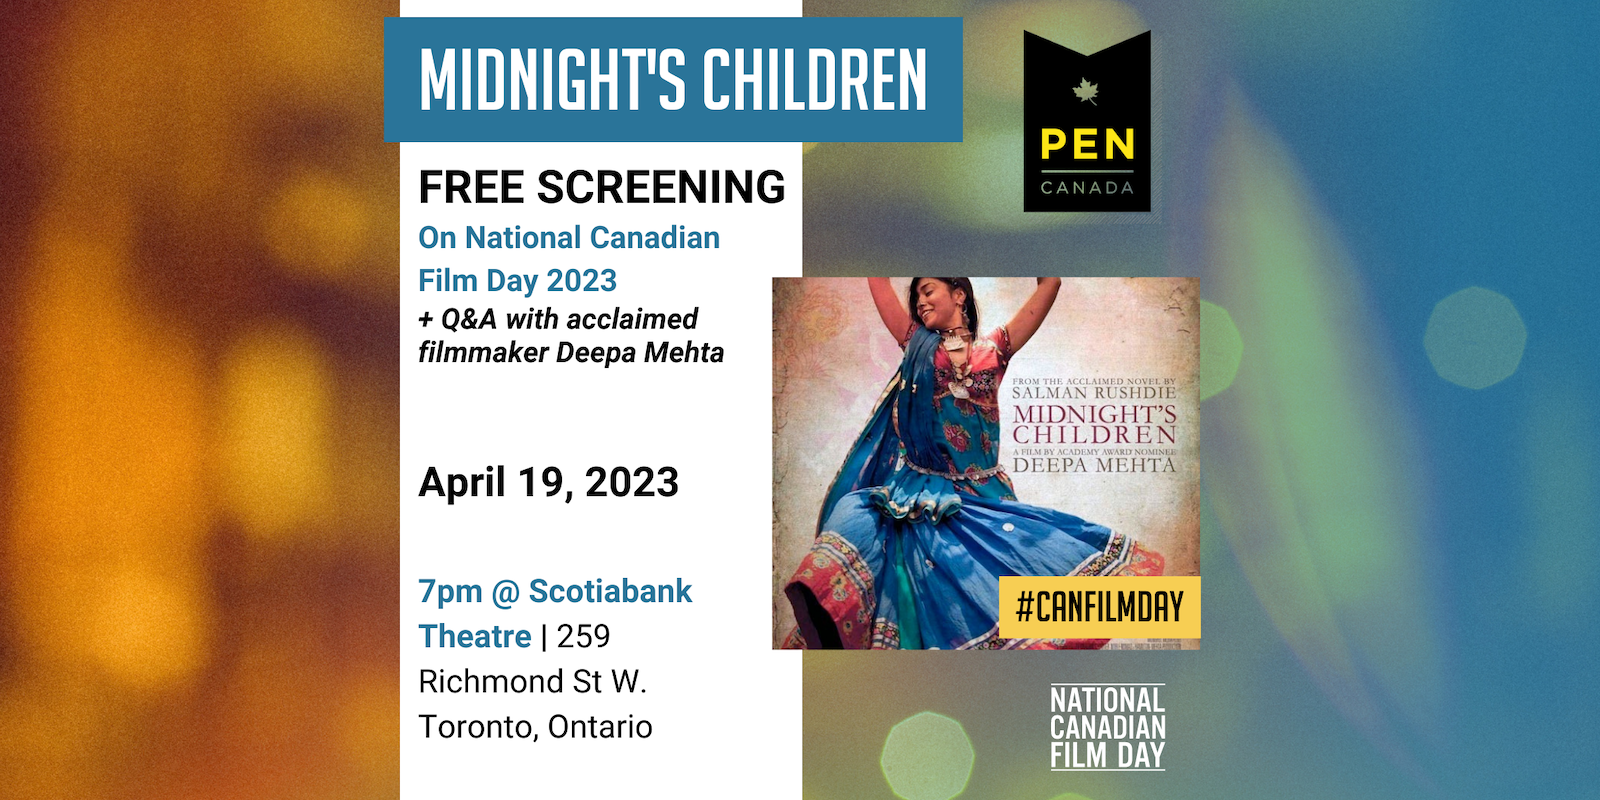 Free screening of Midnight’s Children on National Canadian Film Day